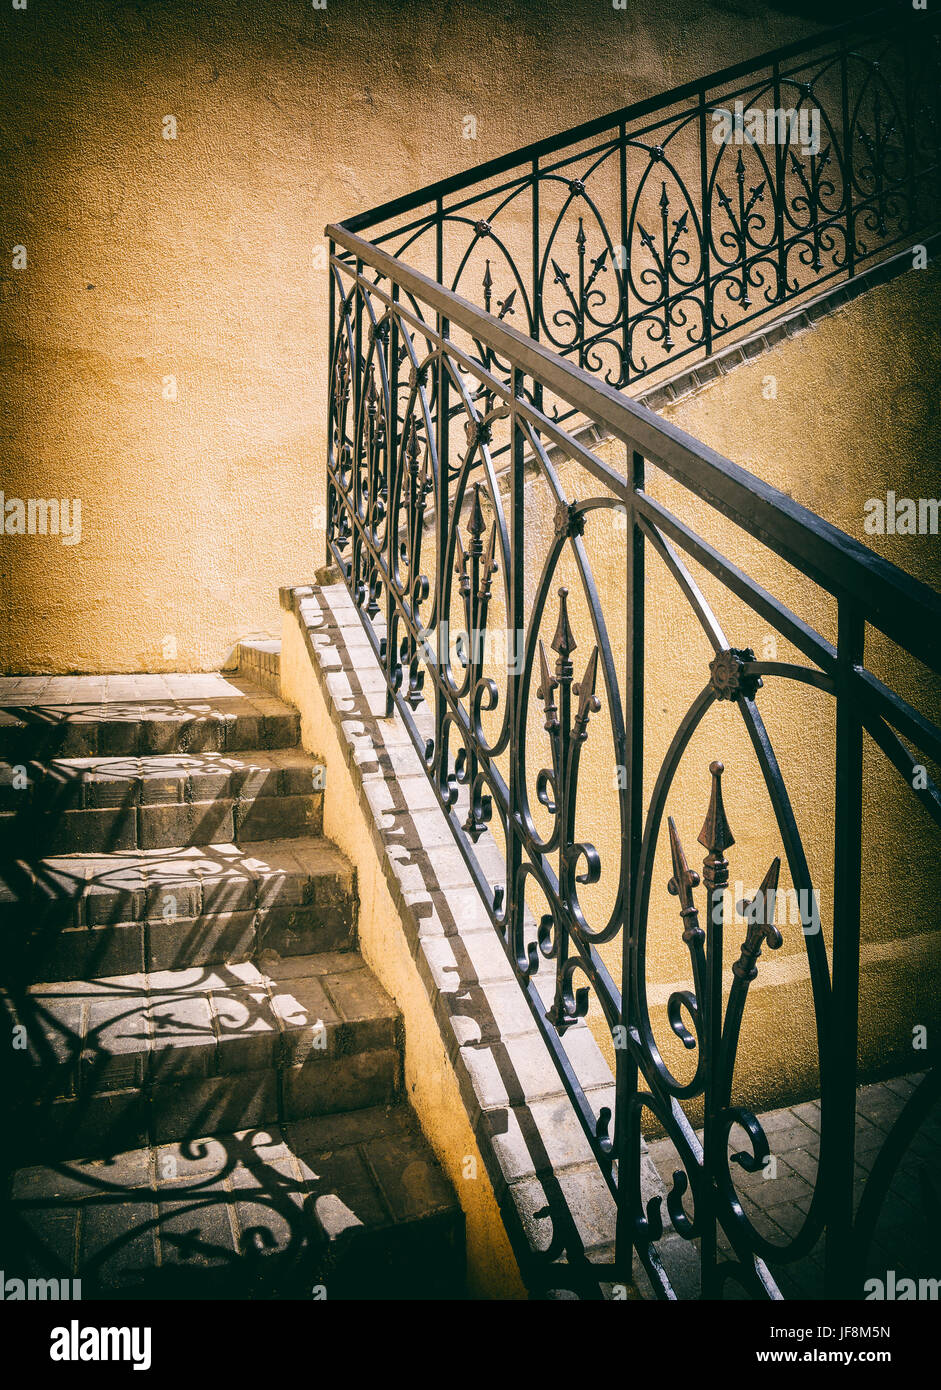 old staircase outdoors Stock Photo